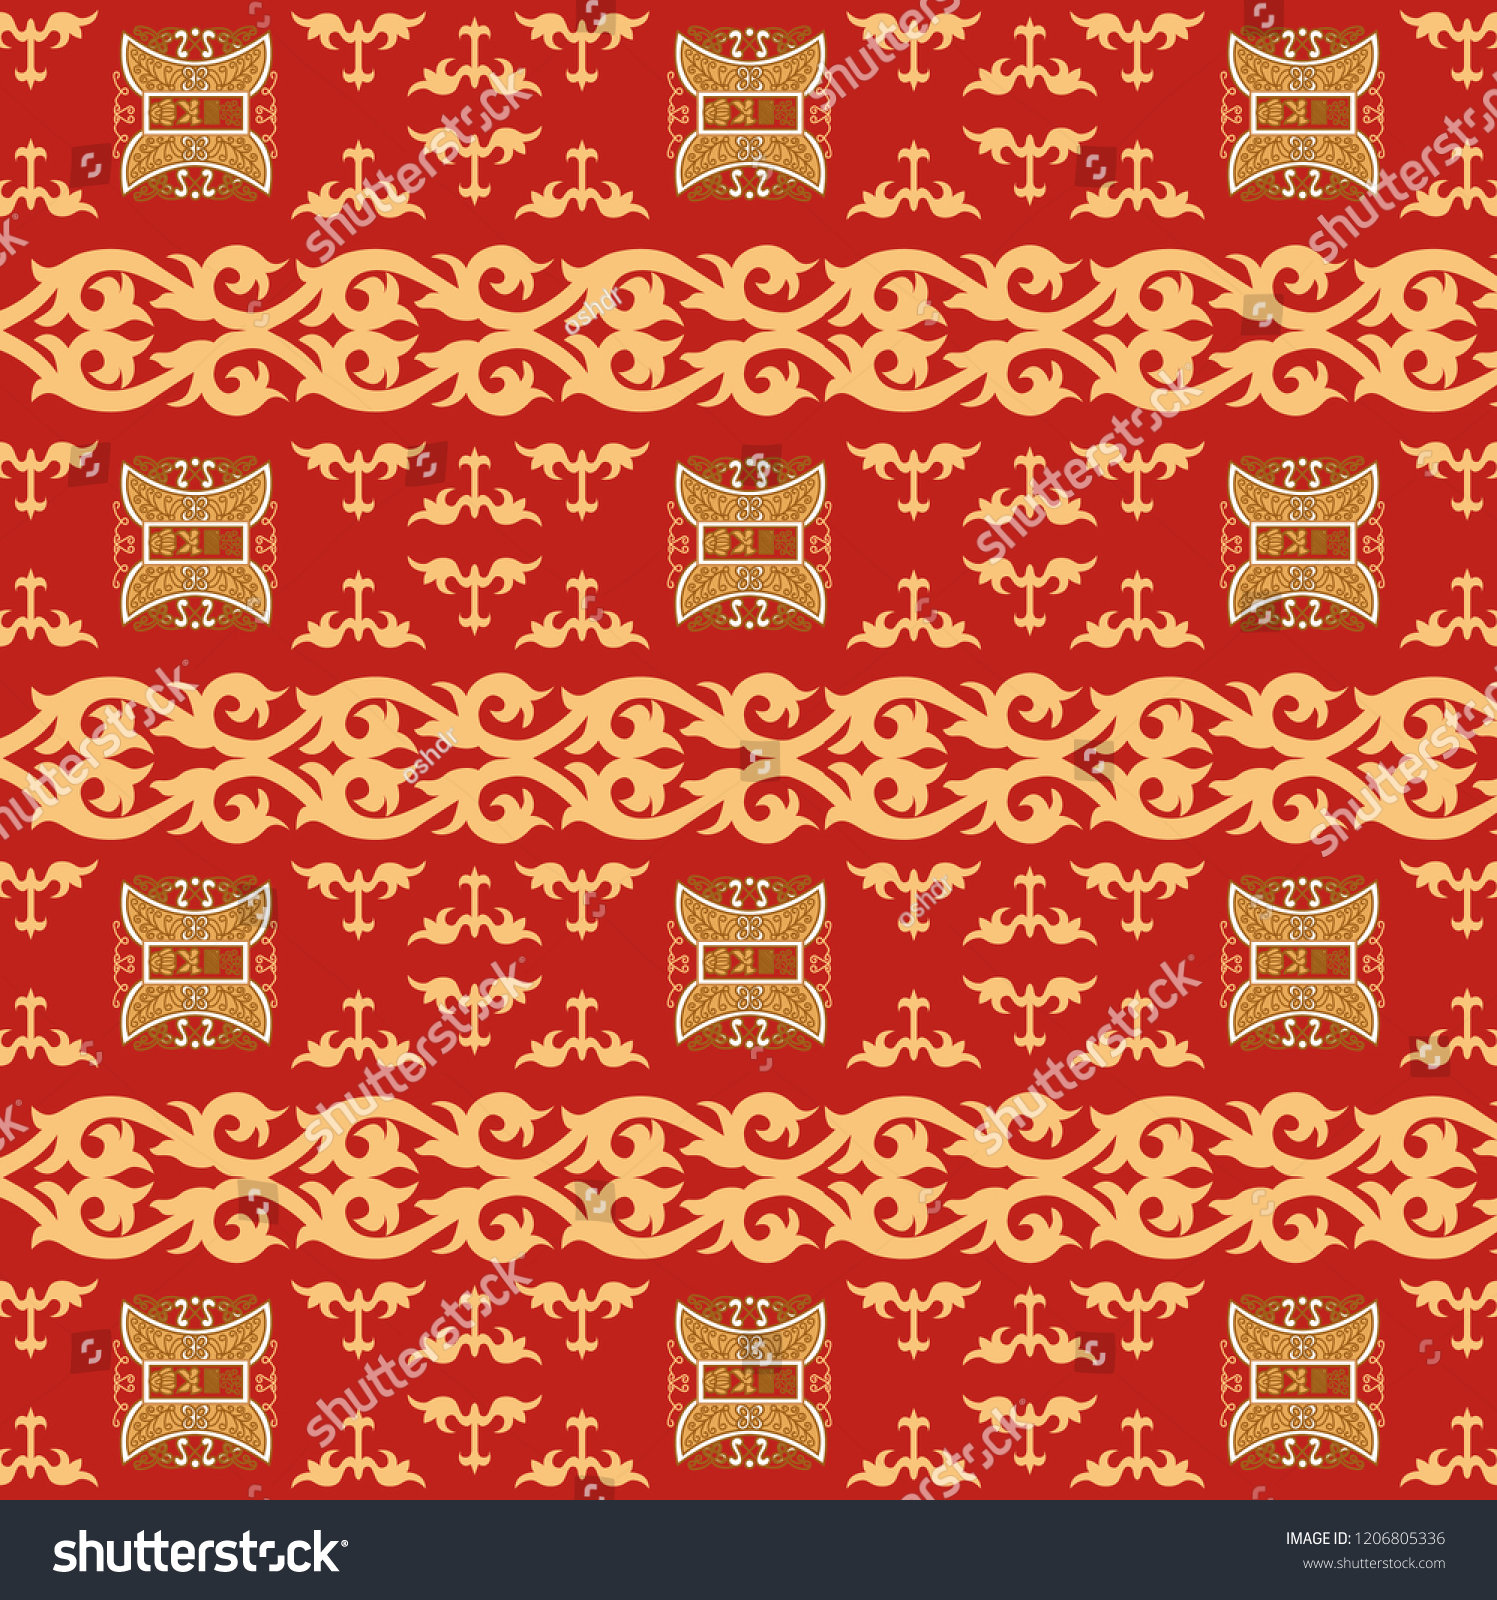 SVG of Batik Aceh. Traditionl art pattern from the province of Aceh. Indonesia svg